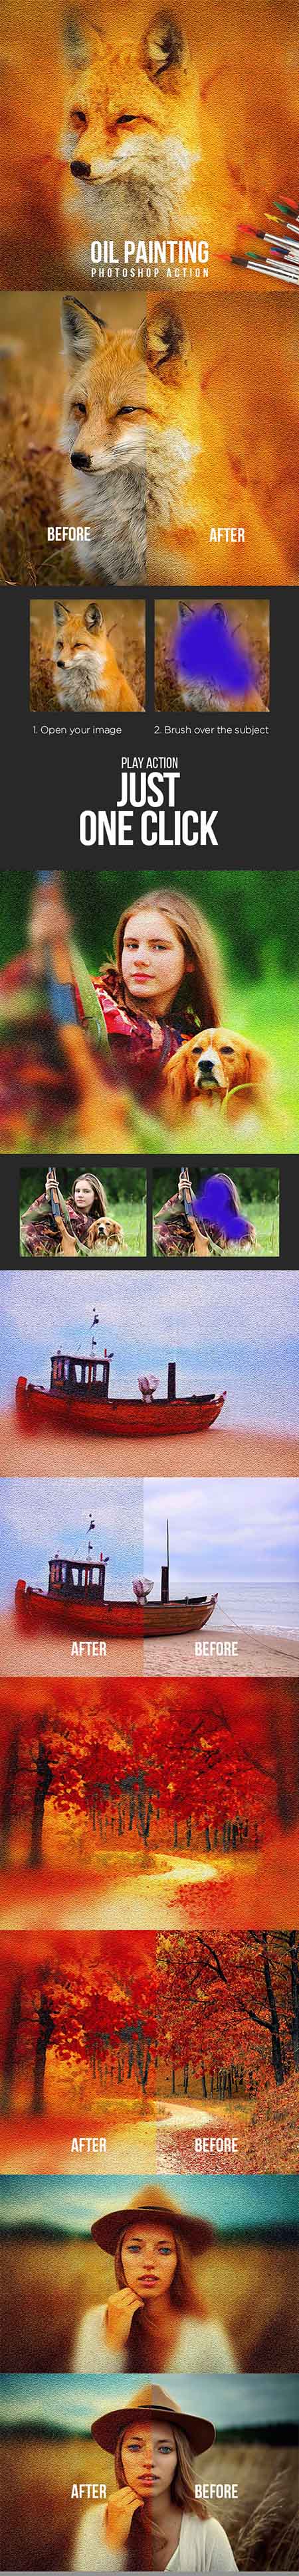 GraphicRiver - Oil Painting Photoshop Action 19175001